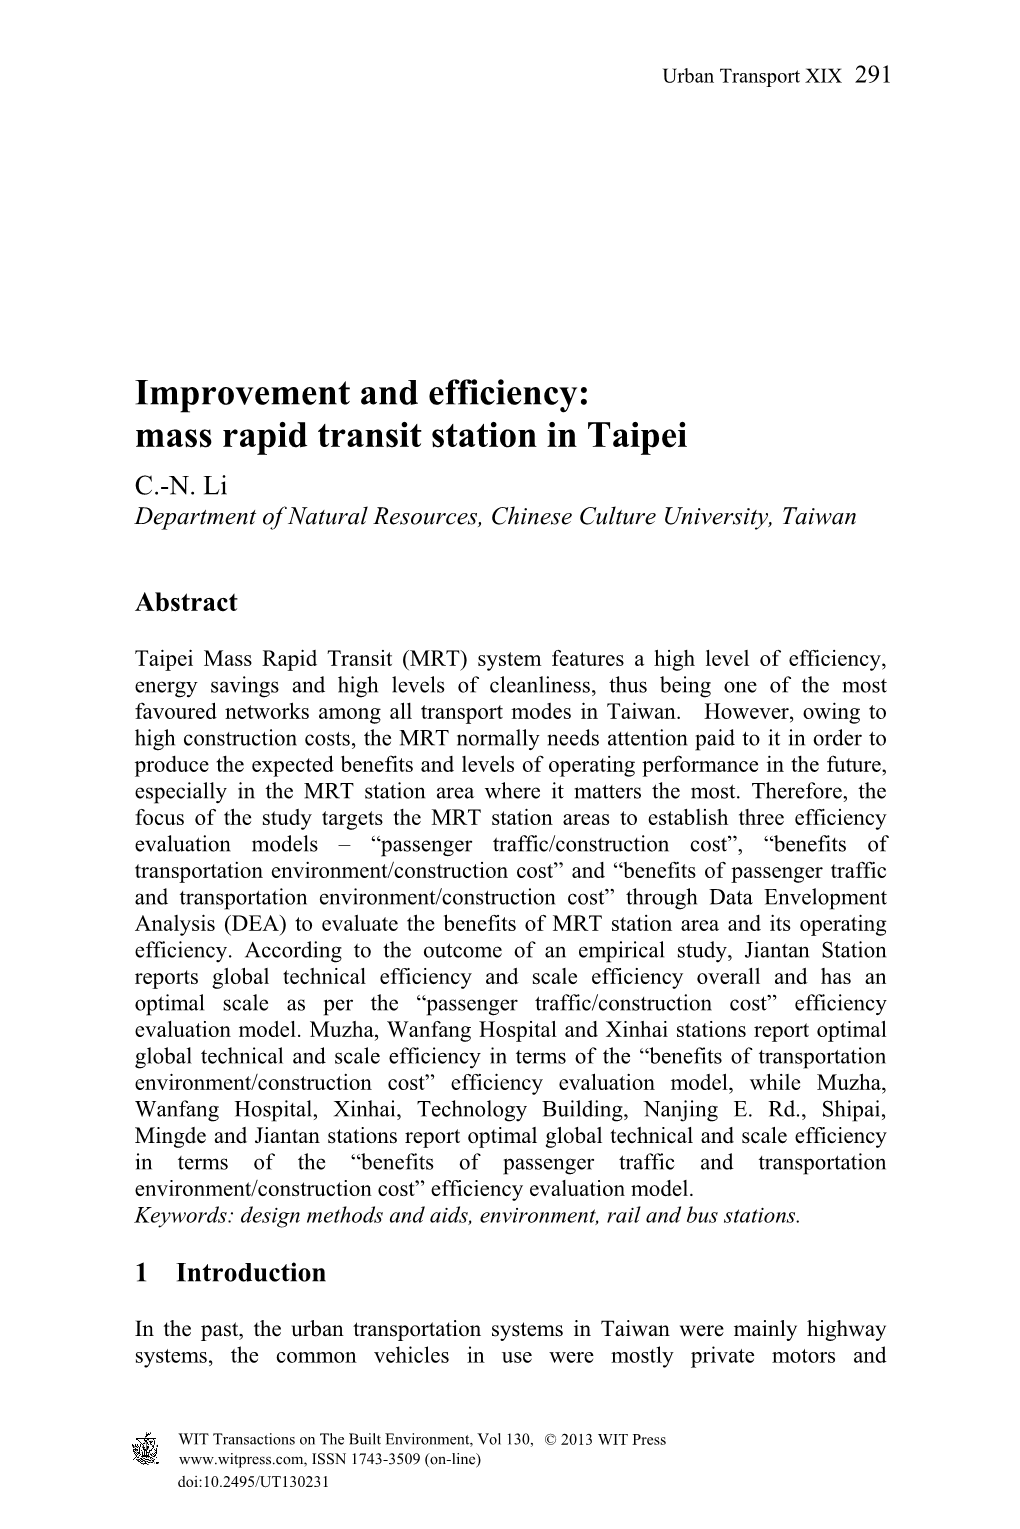 Improvement and Efficiency: Mass Rapid Transit Station in Taipei C.-N